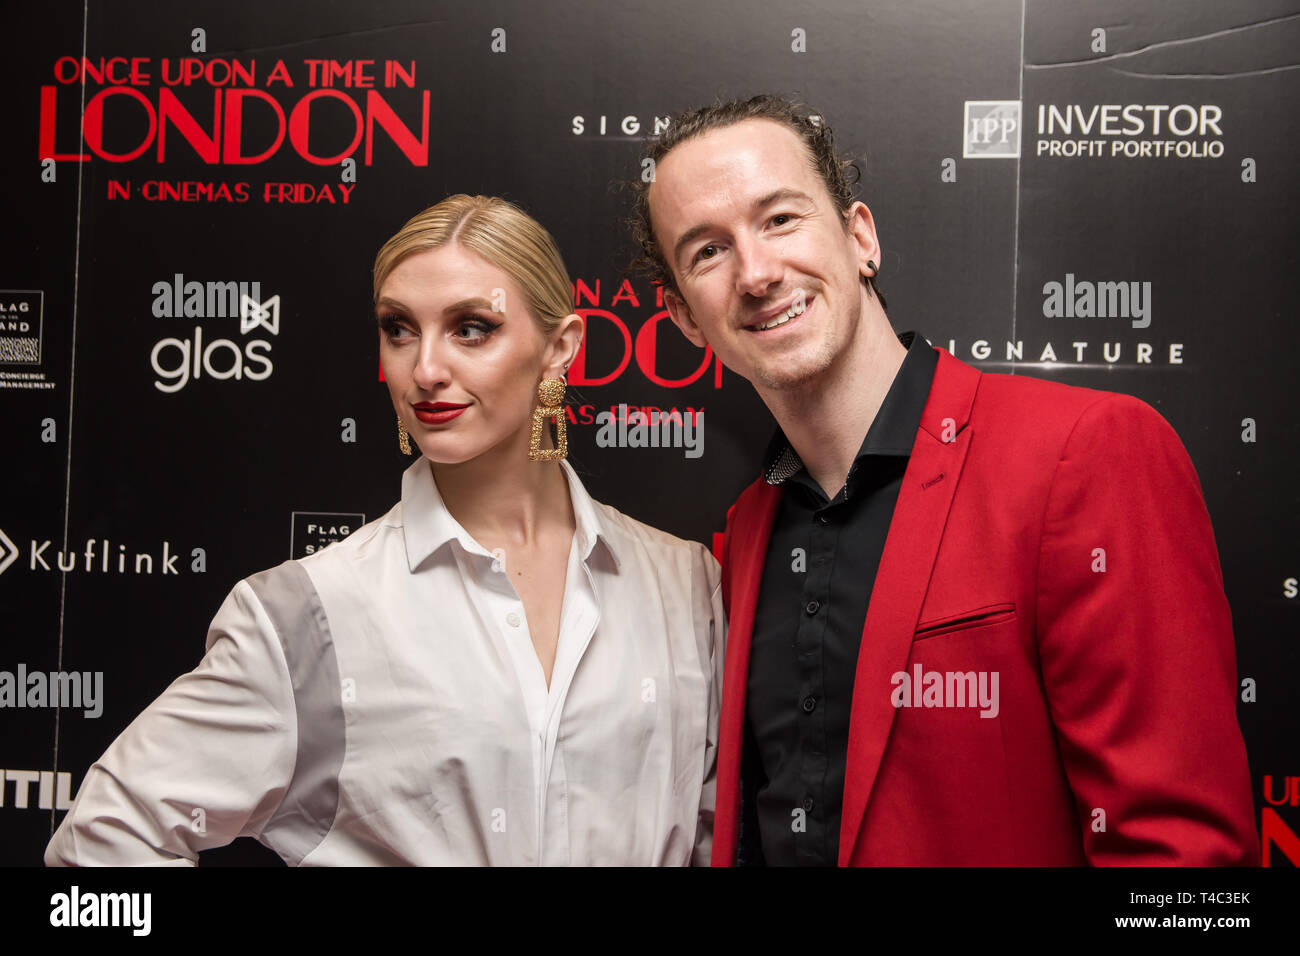 London, UK. 15th Apr, 2019. Arrivals at Once Upon a Time in London - London premiere of the rise and fall of a nationwide criminal empire that paved the way for notorious London gangsters the Kray Twins and the Richardsons at The Troxy 490 Commercial Road, on 15 April 2019, London, UK. Credit: Picture Capital/Alamy Live News Stock Photo